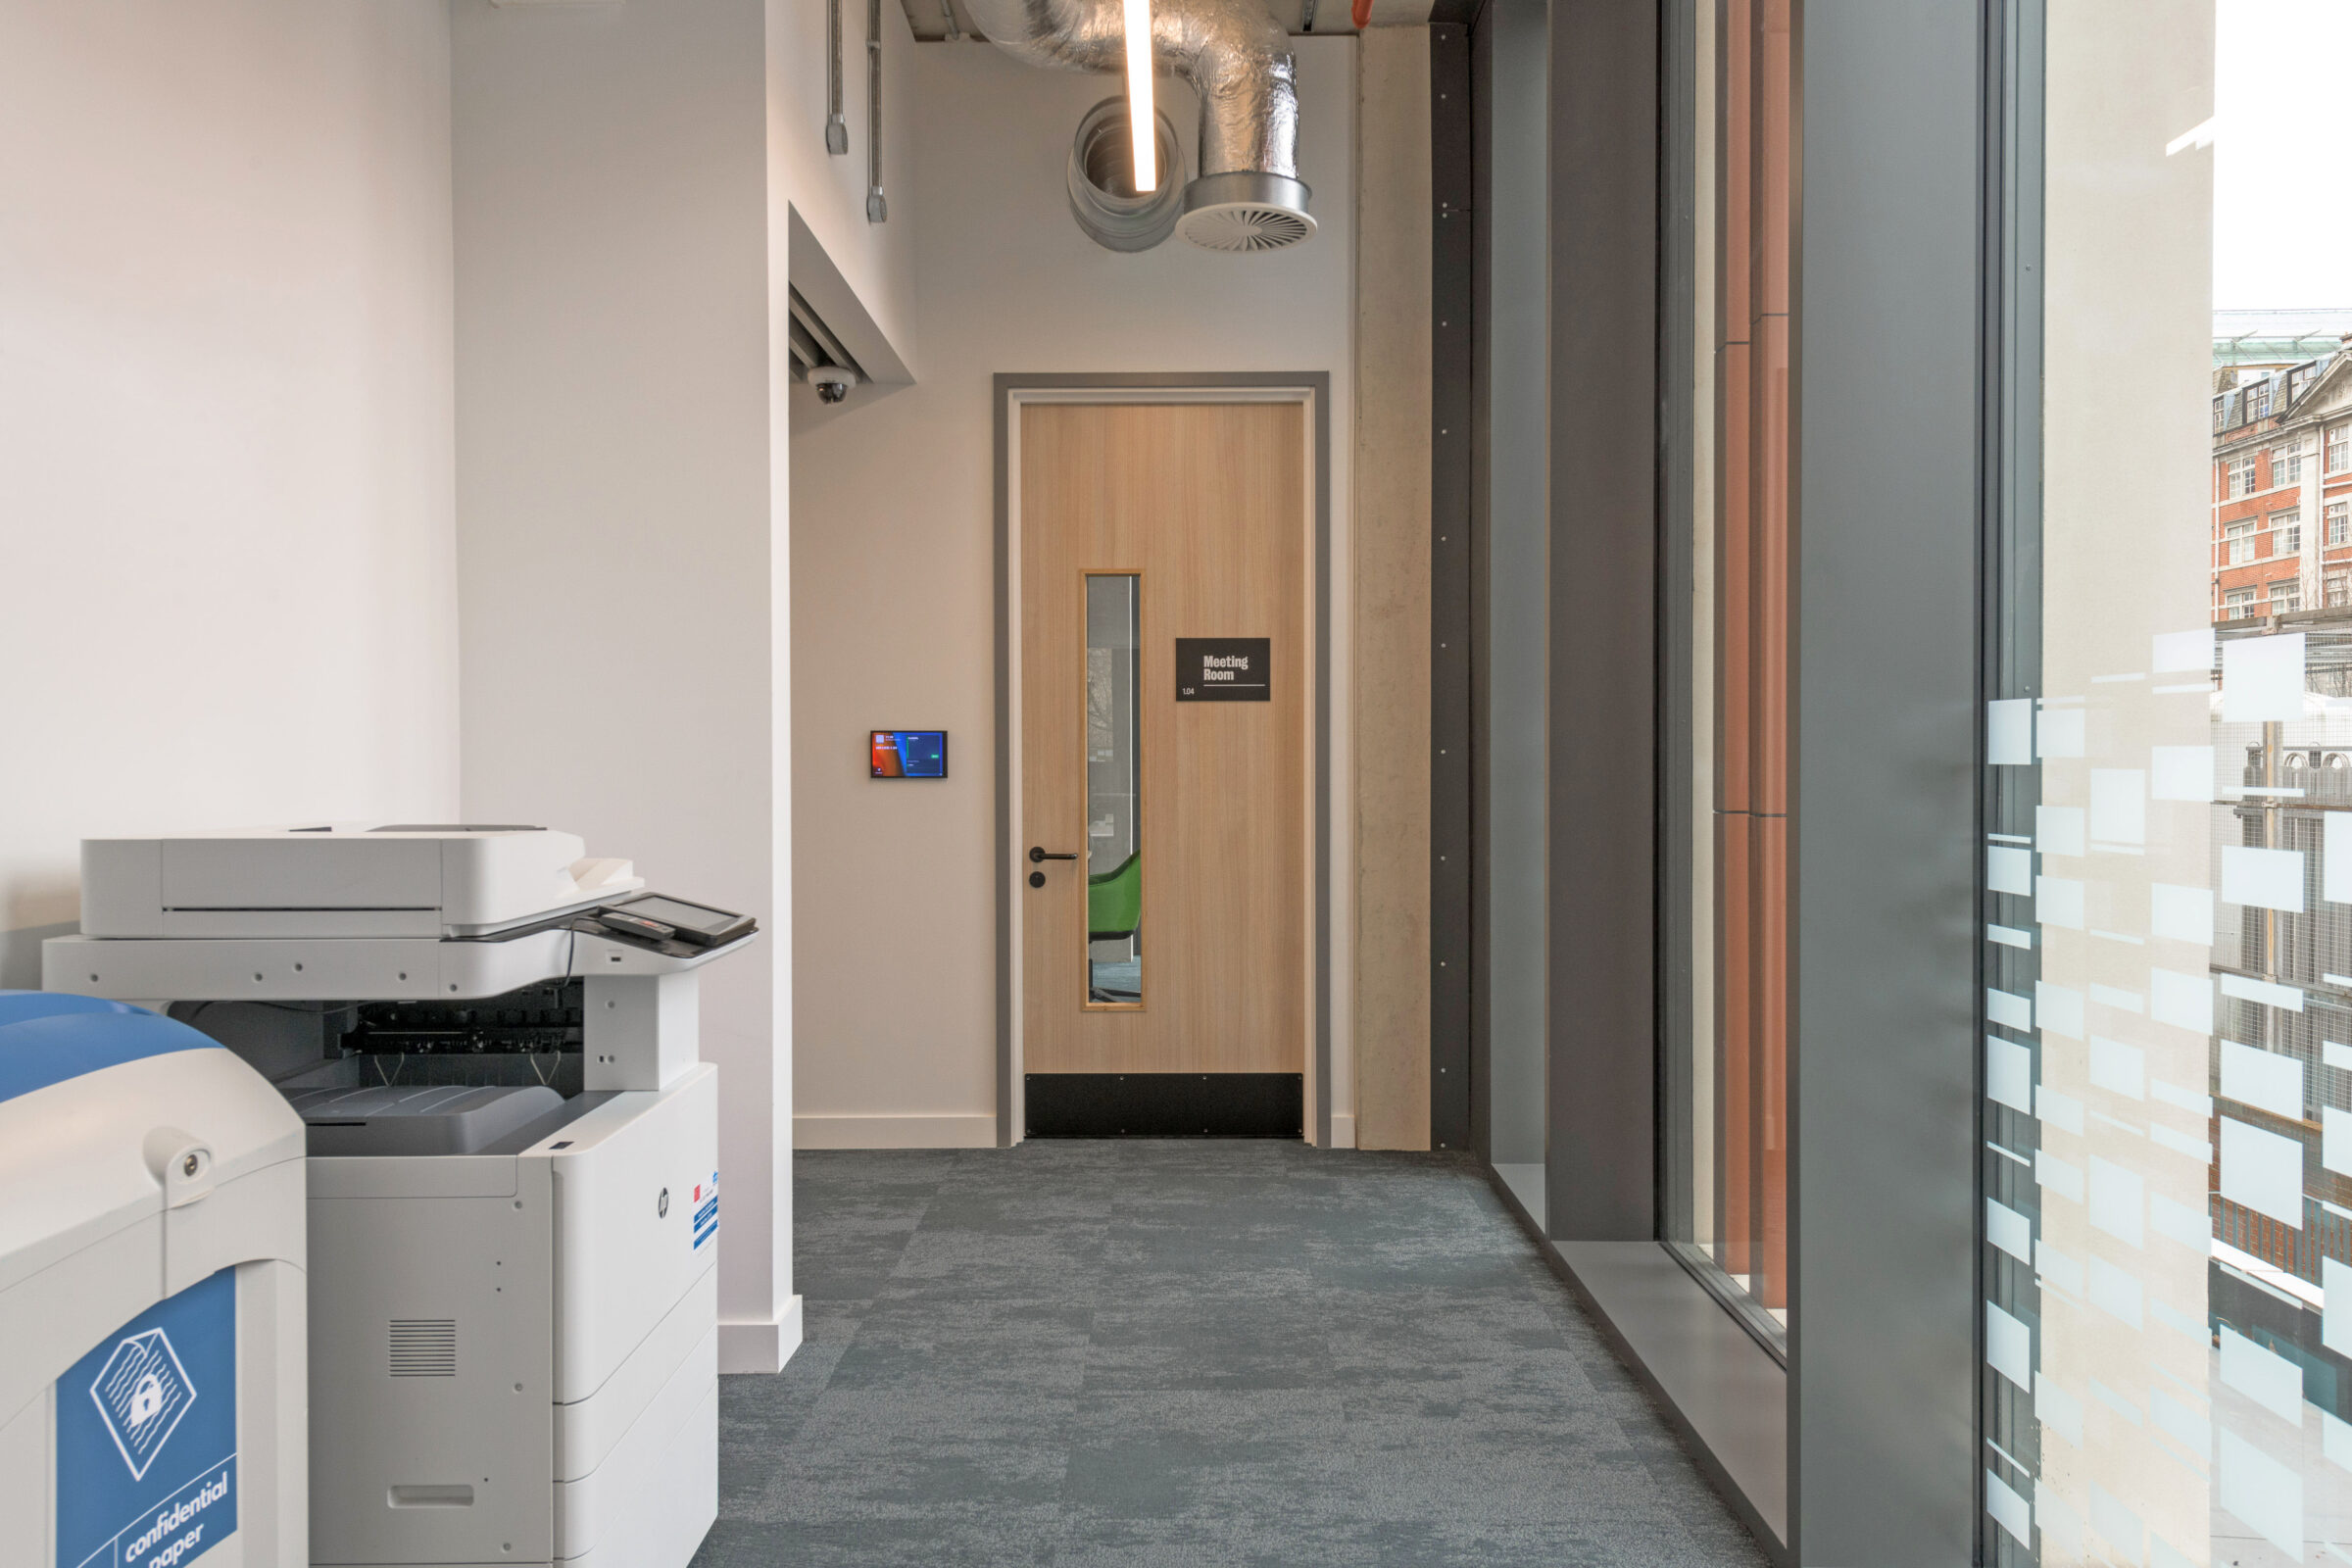 Stylish Bespoke Fire Doors Manufactured for The London Institute for Healthcare Engineering